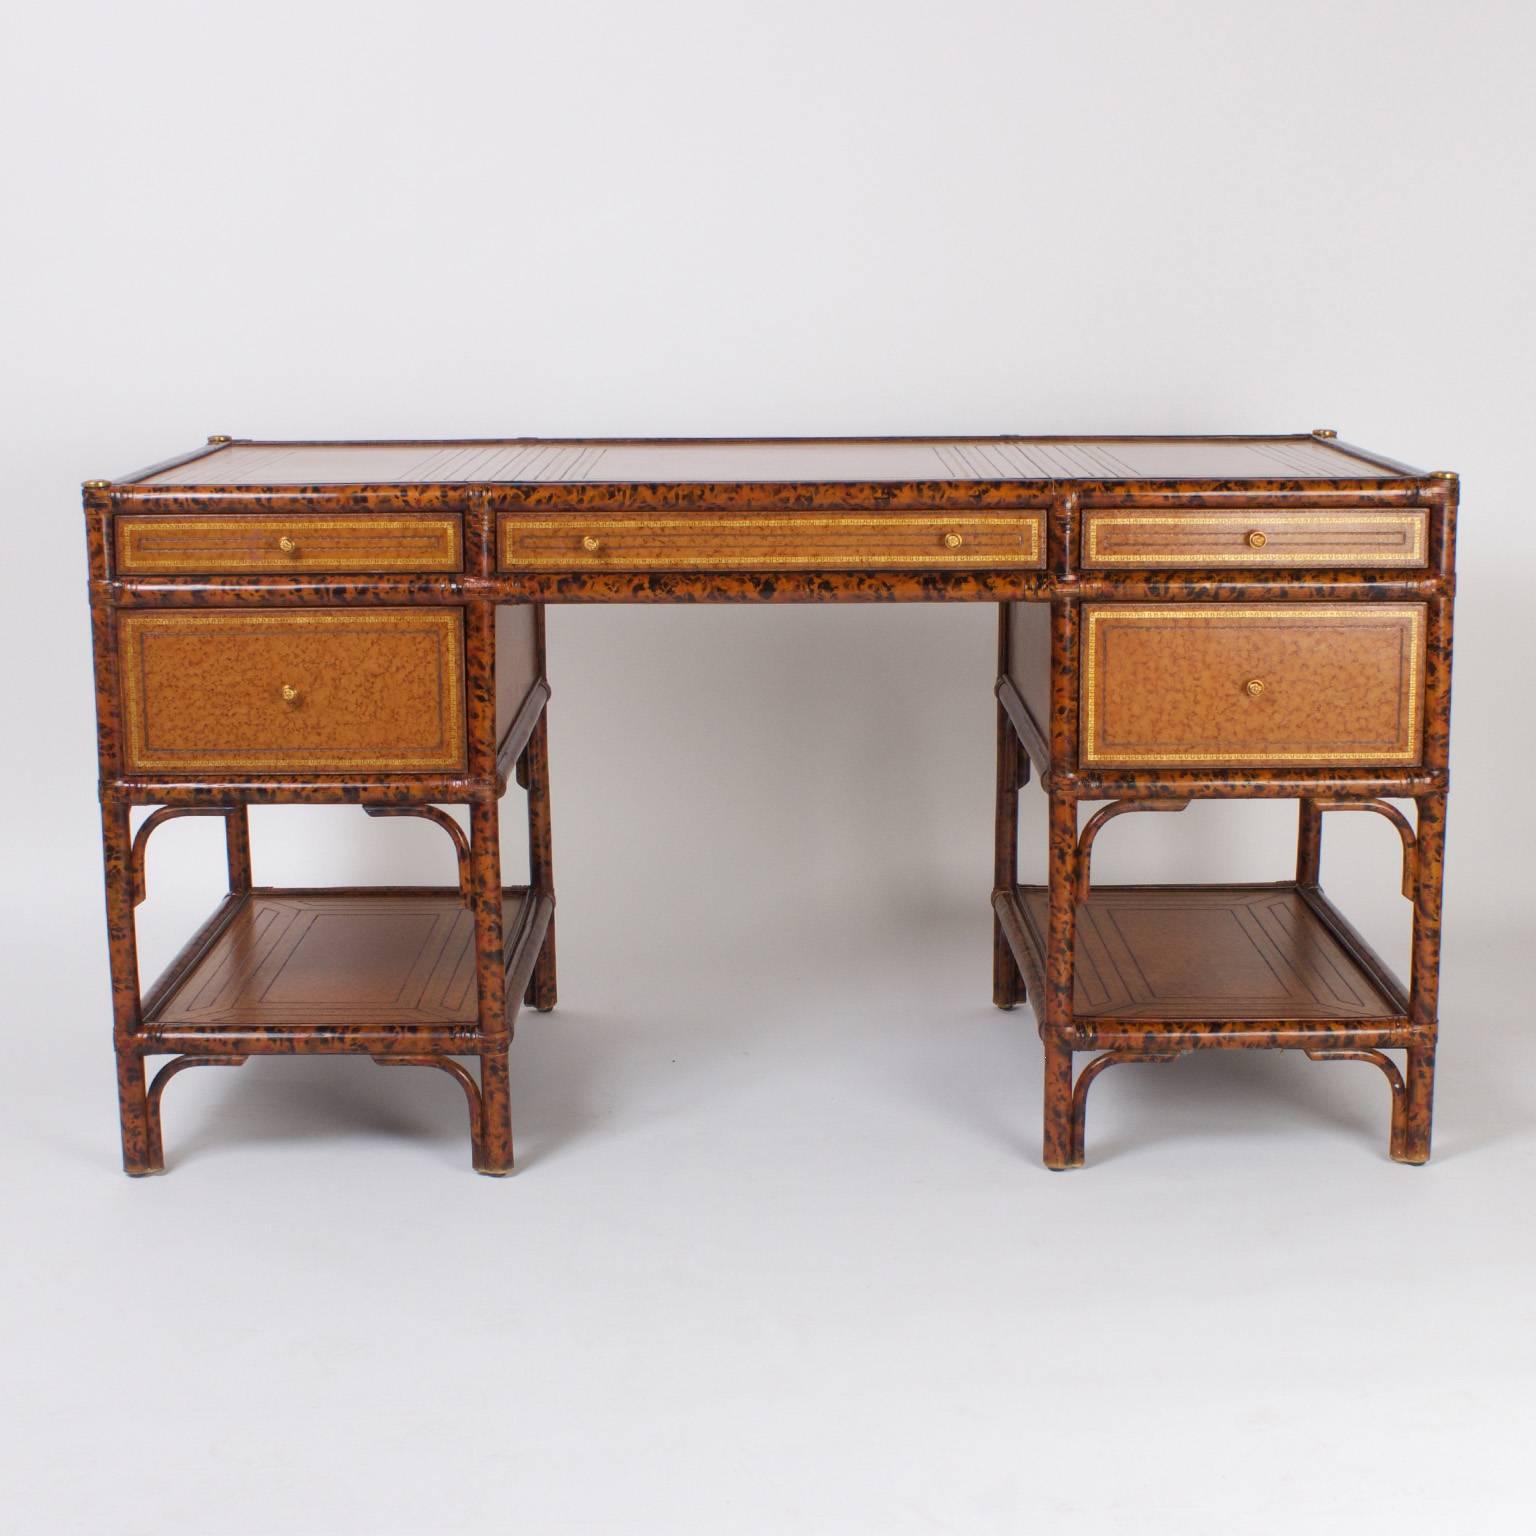 Impressive five drawer desk with a faux tortoise and bamboo frame and variegated, tooled and gilt tan leather panels on the top sides, drawer fronts and lower plateau.This desk is finished on all four sides. Signed Maitland-Smith in the middle